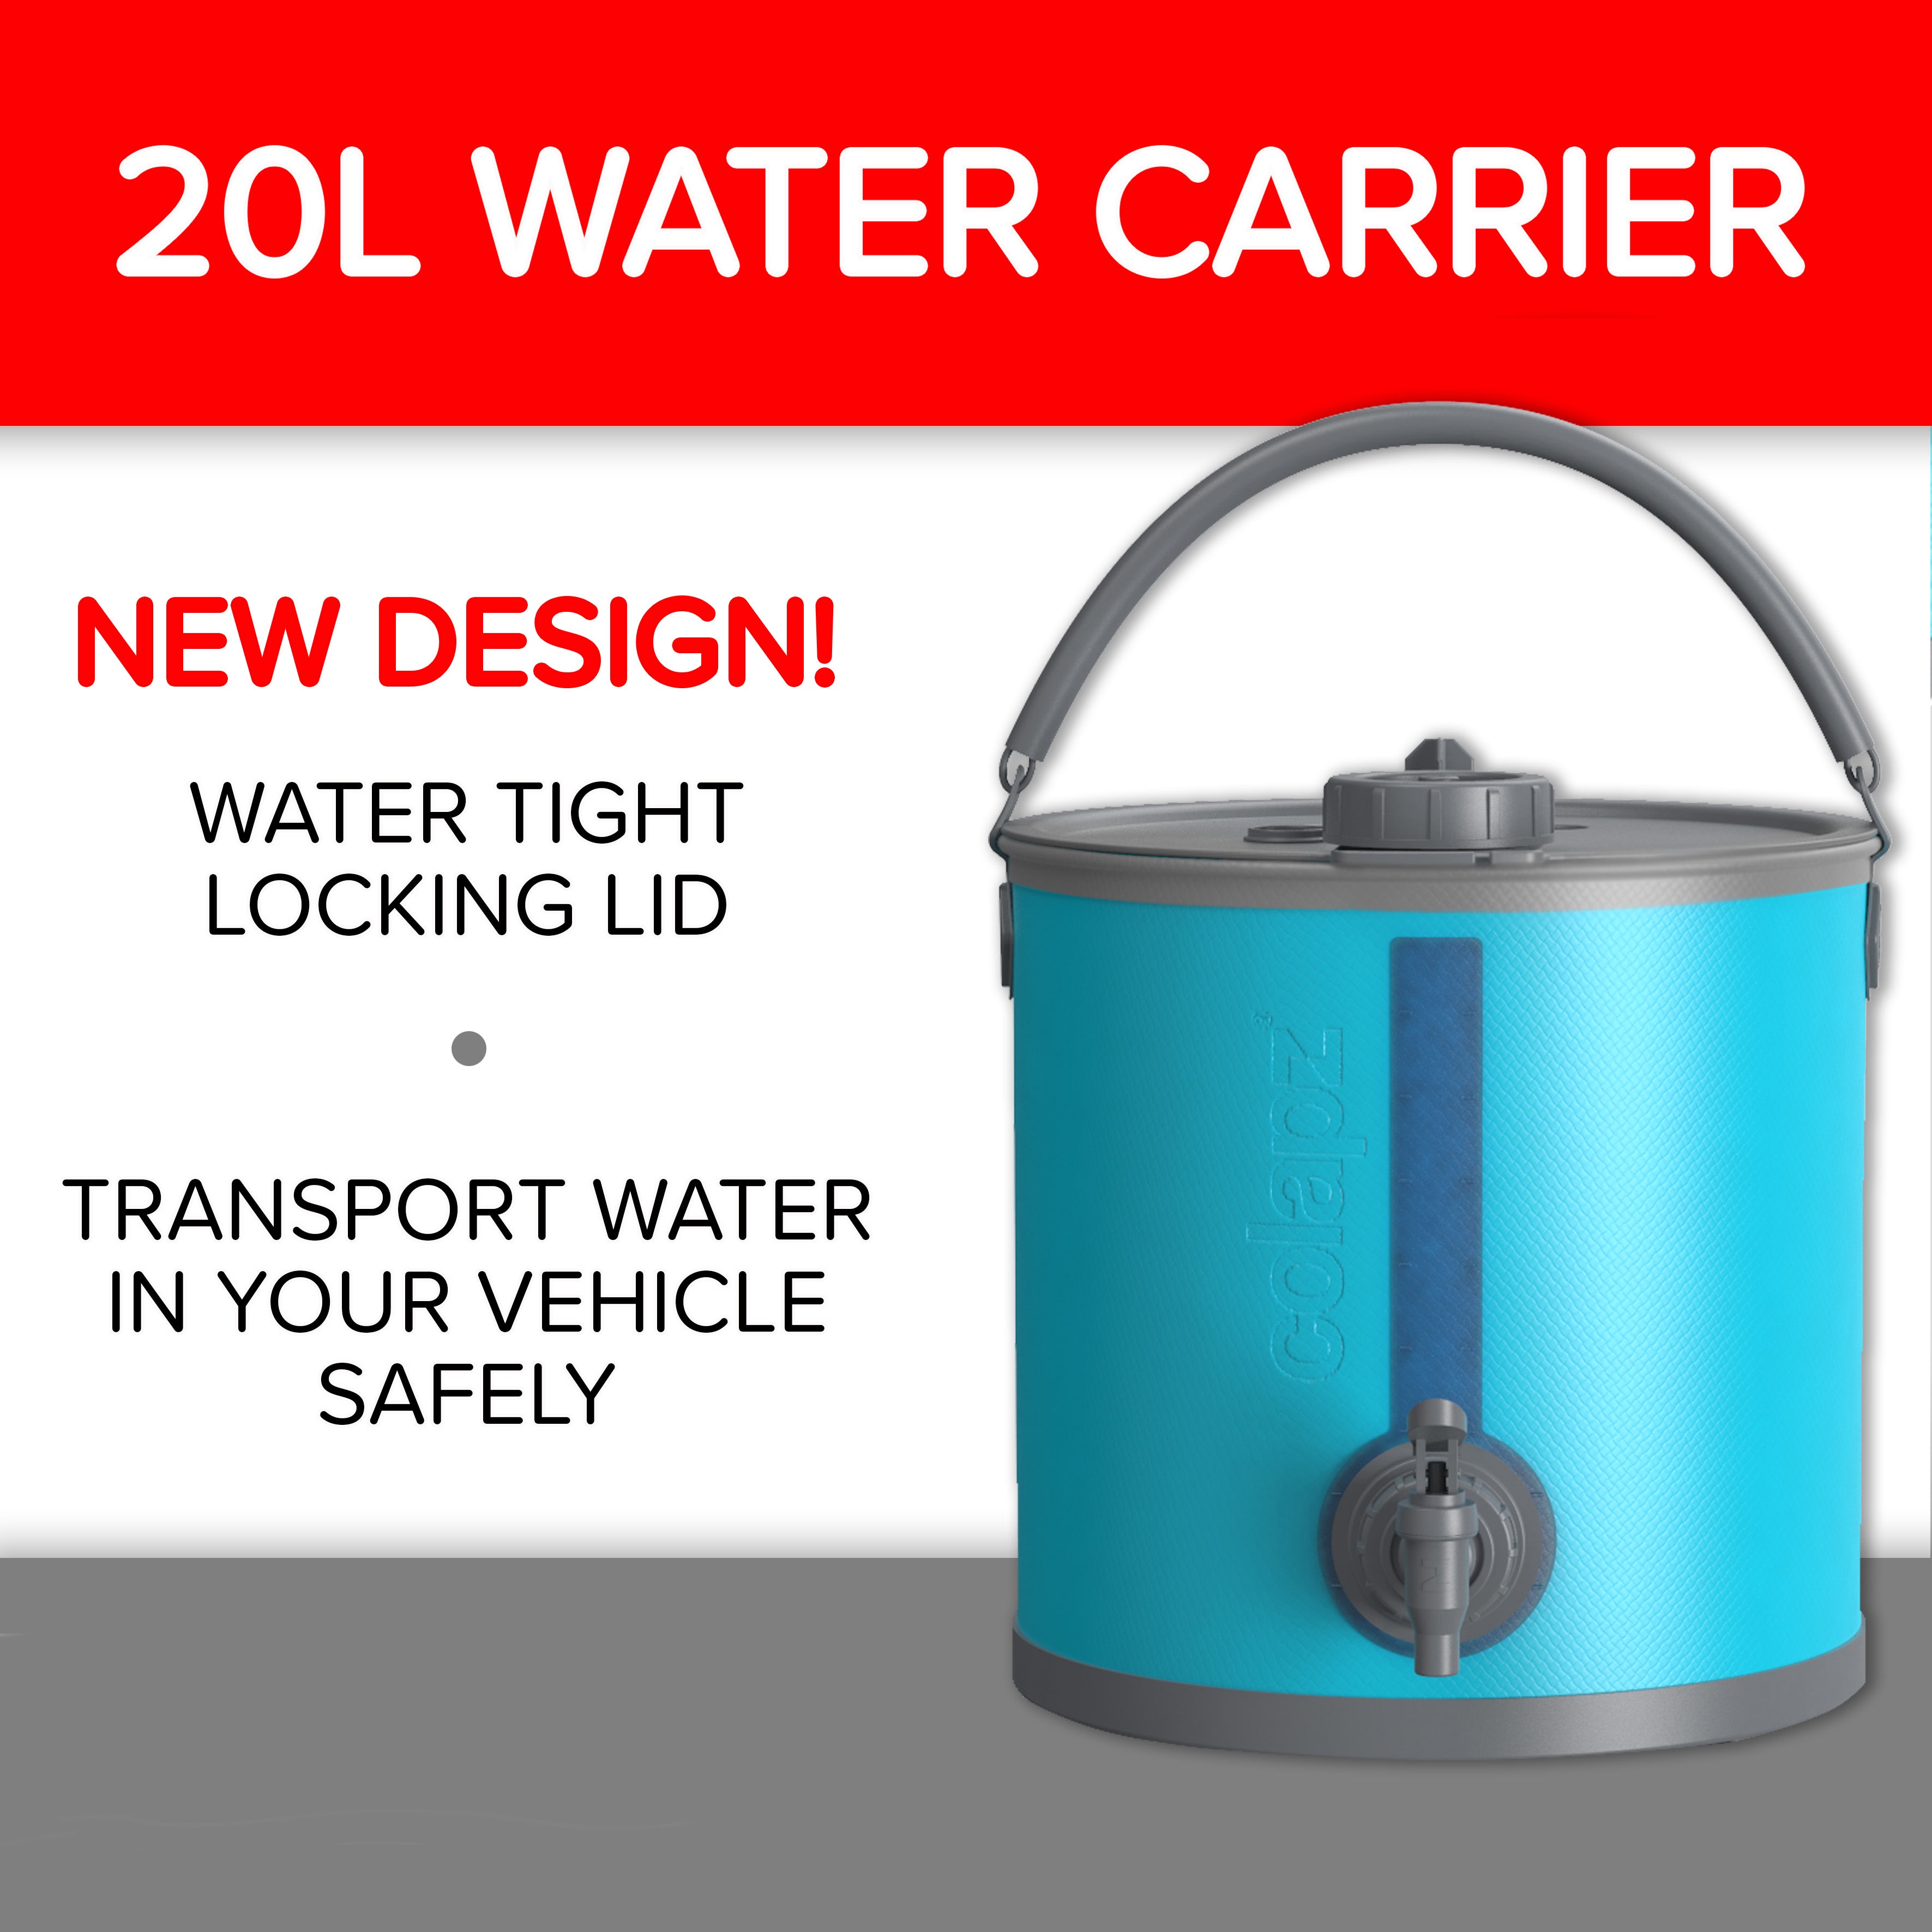 Collapsible 2-in-1 Water Carrier & Bucket with Lockable Lid, Handle and Tap - 20 Litres Capacity